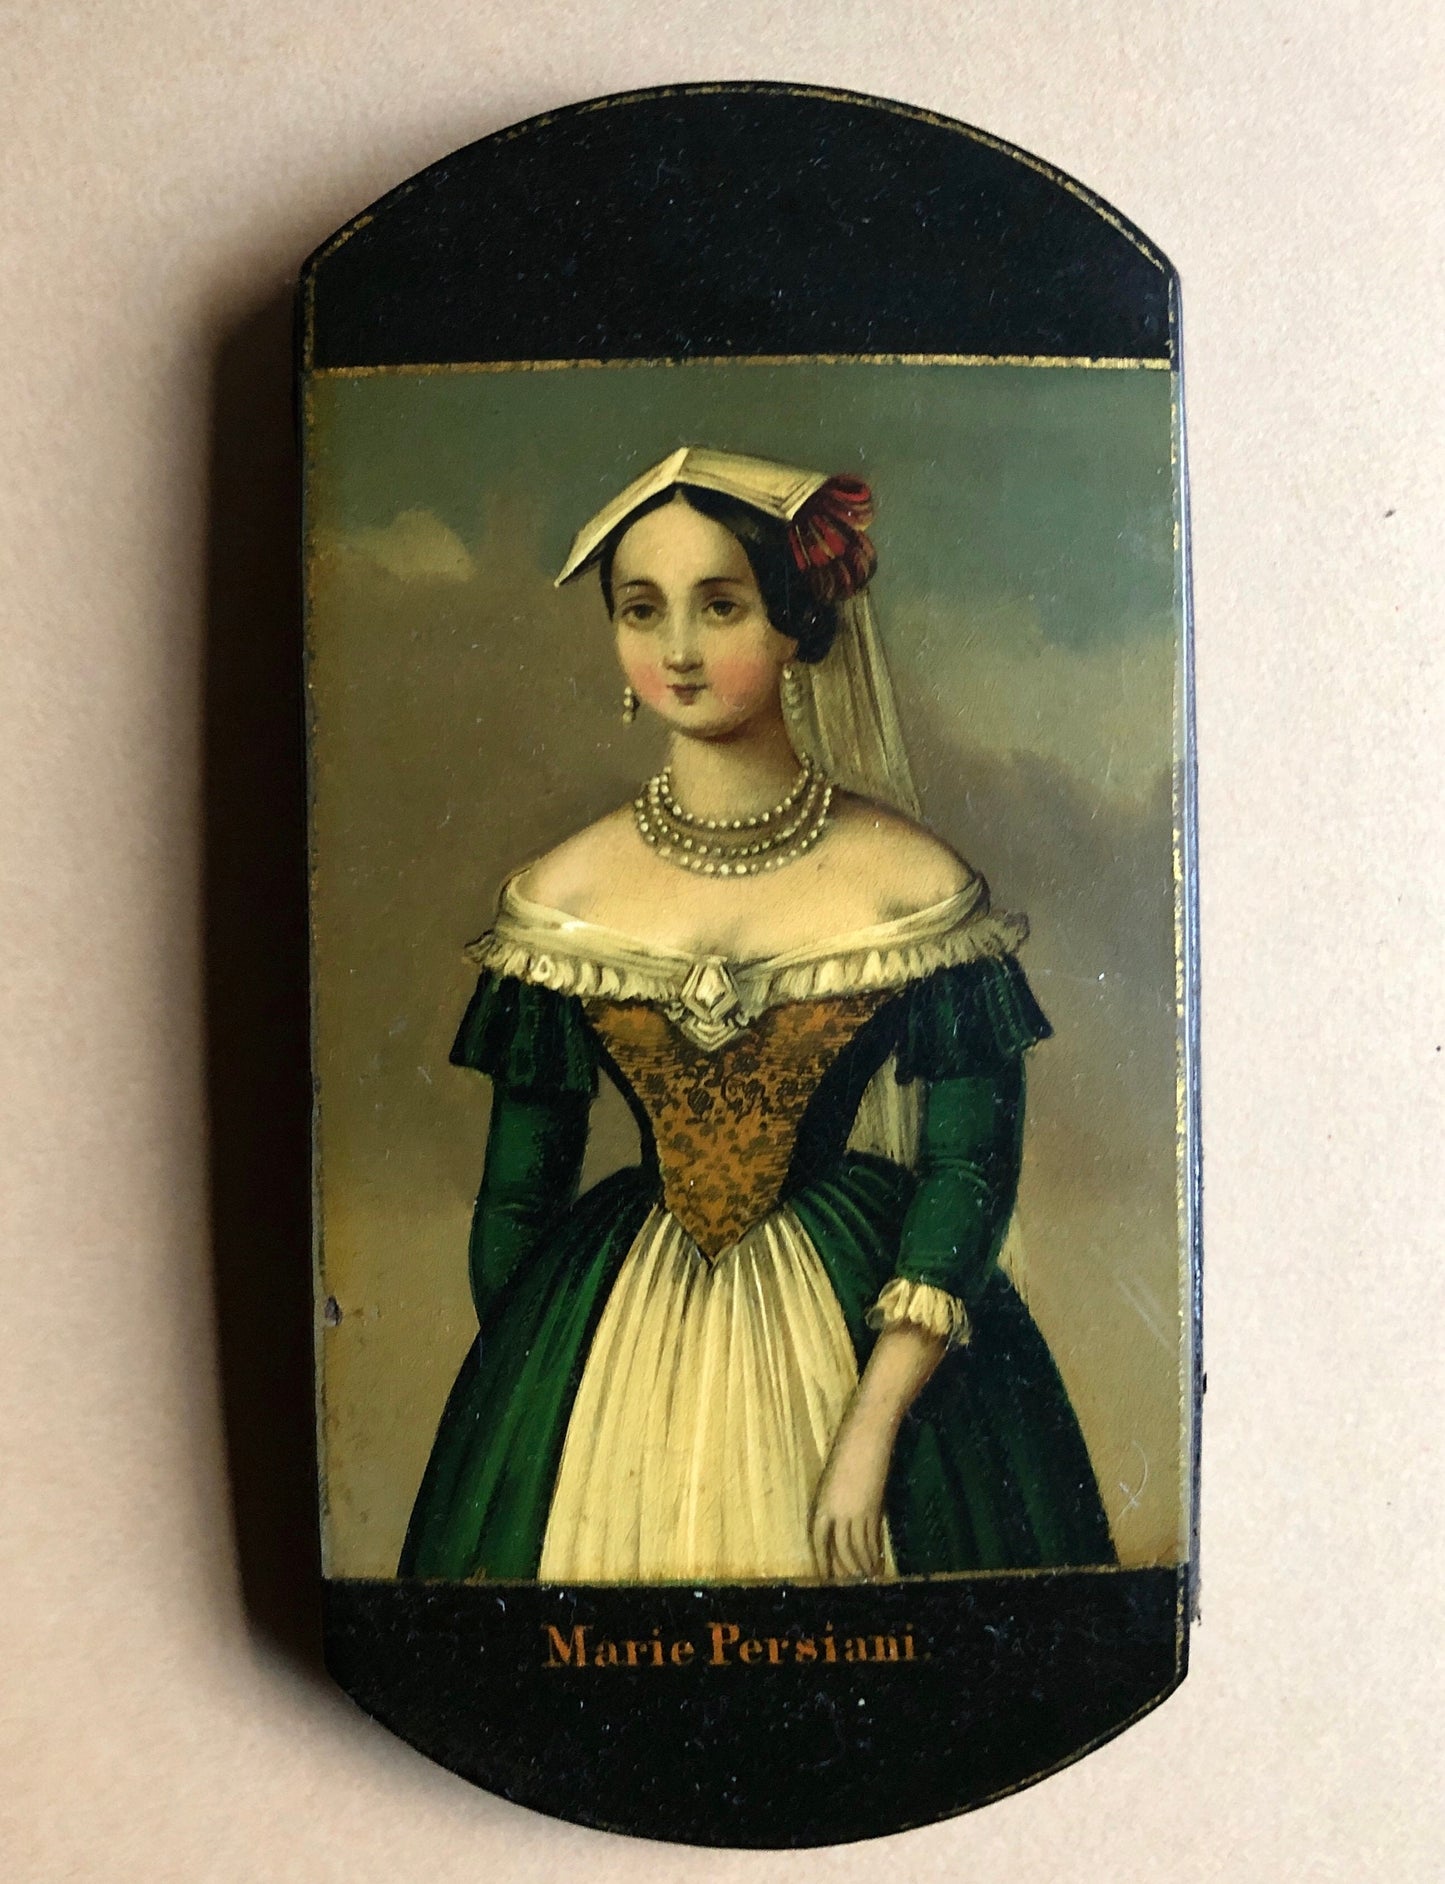 Two french Cigar Cases Featuring Original Portraits of Opera Singer Marie Persiani. 1800’s. Size: 14 x 7 cms. Very Good Condition.